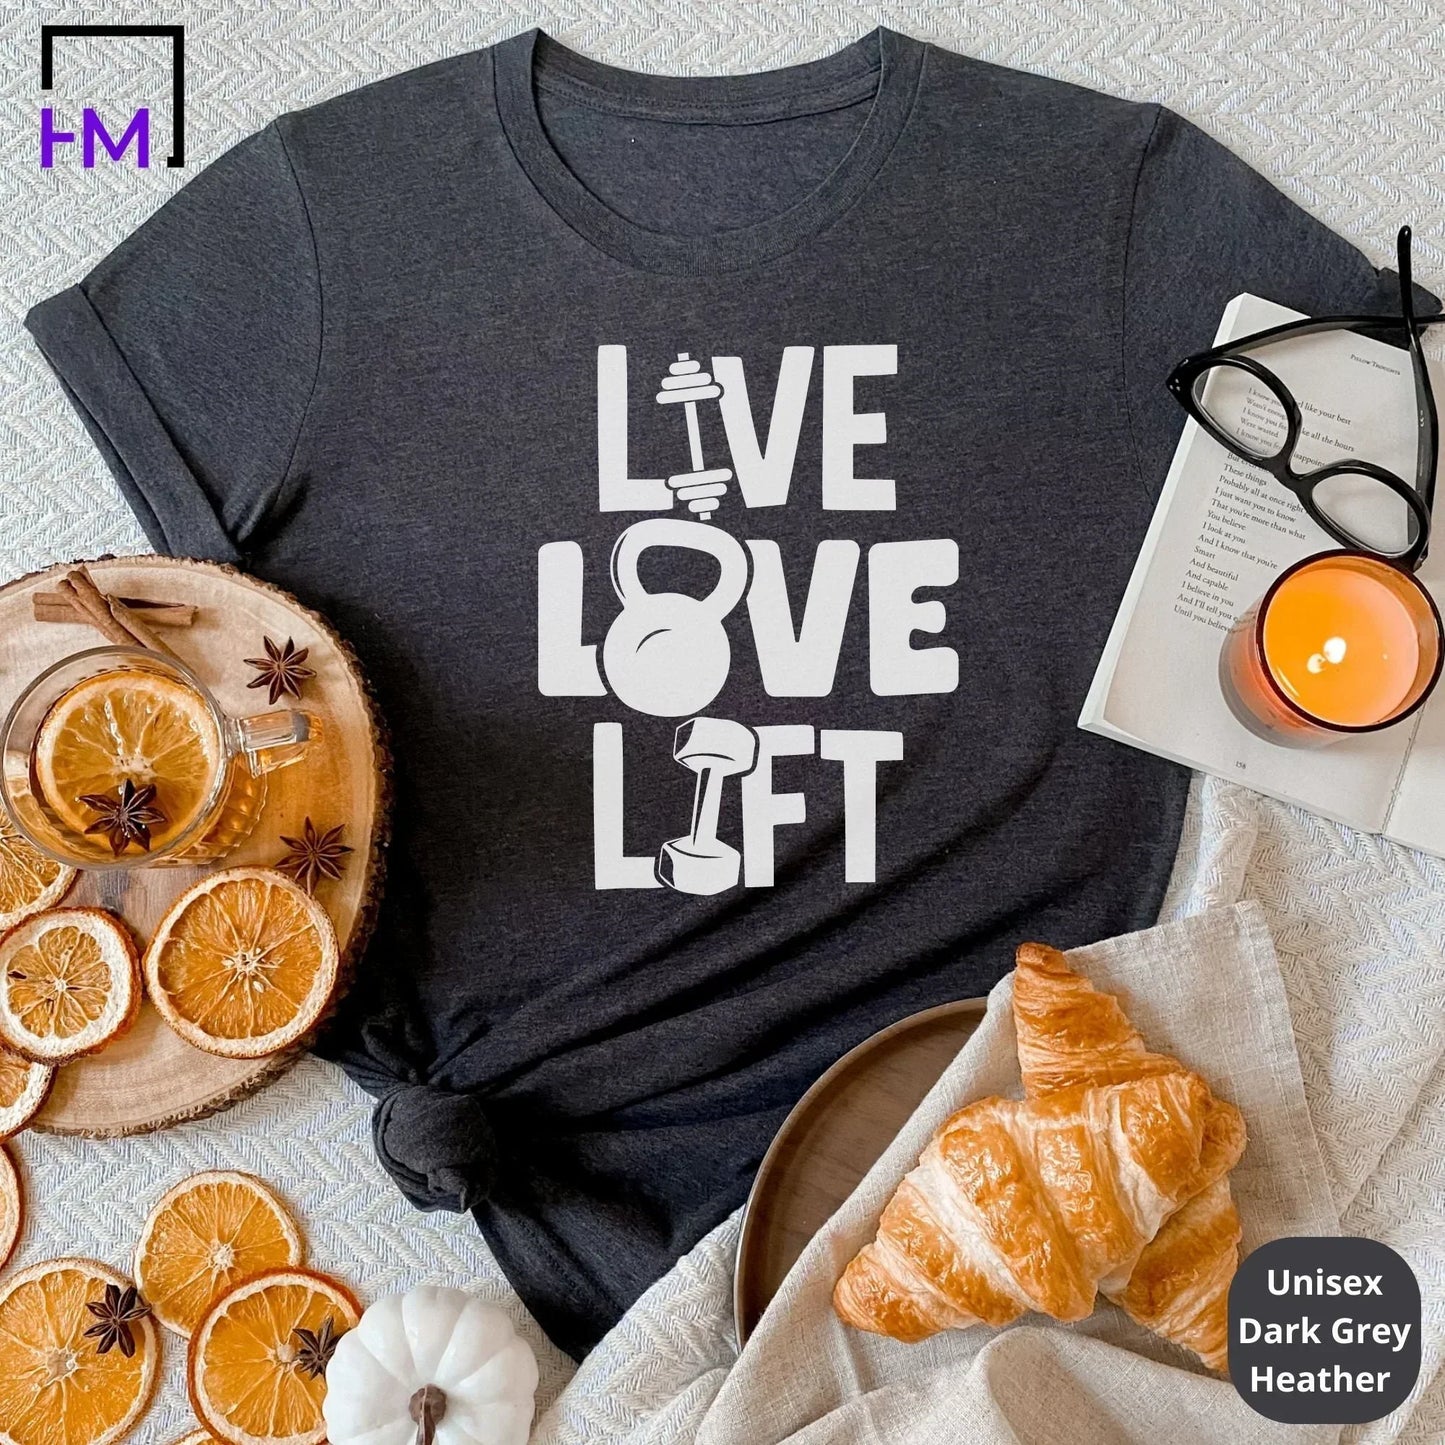 Running My Best Life, Gym Lovers Shirt, Gifts for Gym Lovers, Gym Shirt,  Funny Shirt, Gifts for Women, Gifts for Men, Gym Shirts Art Board Print  for Sale by Printed Merch